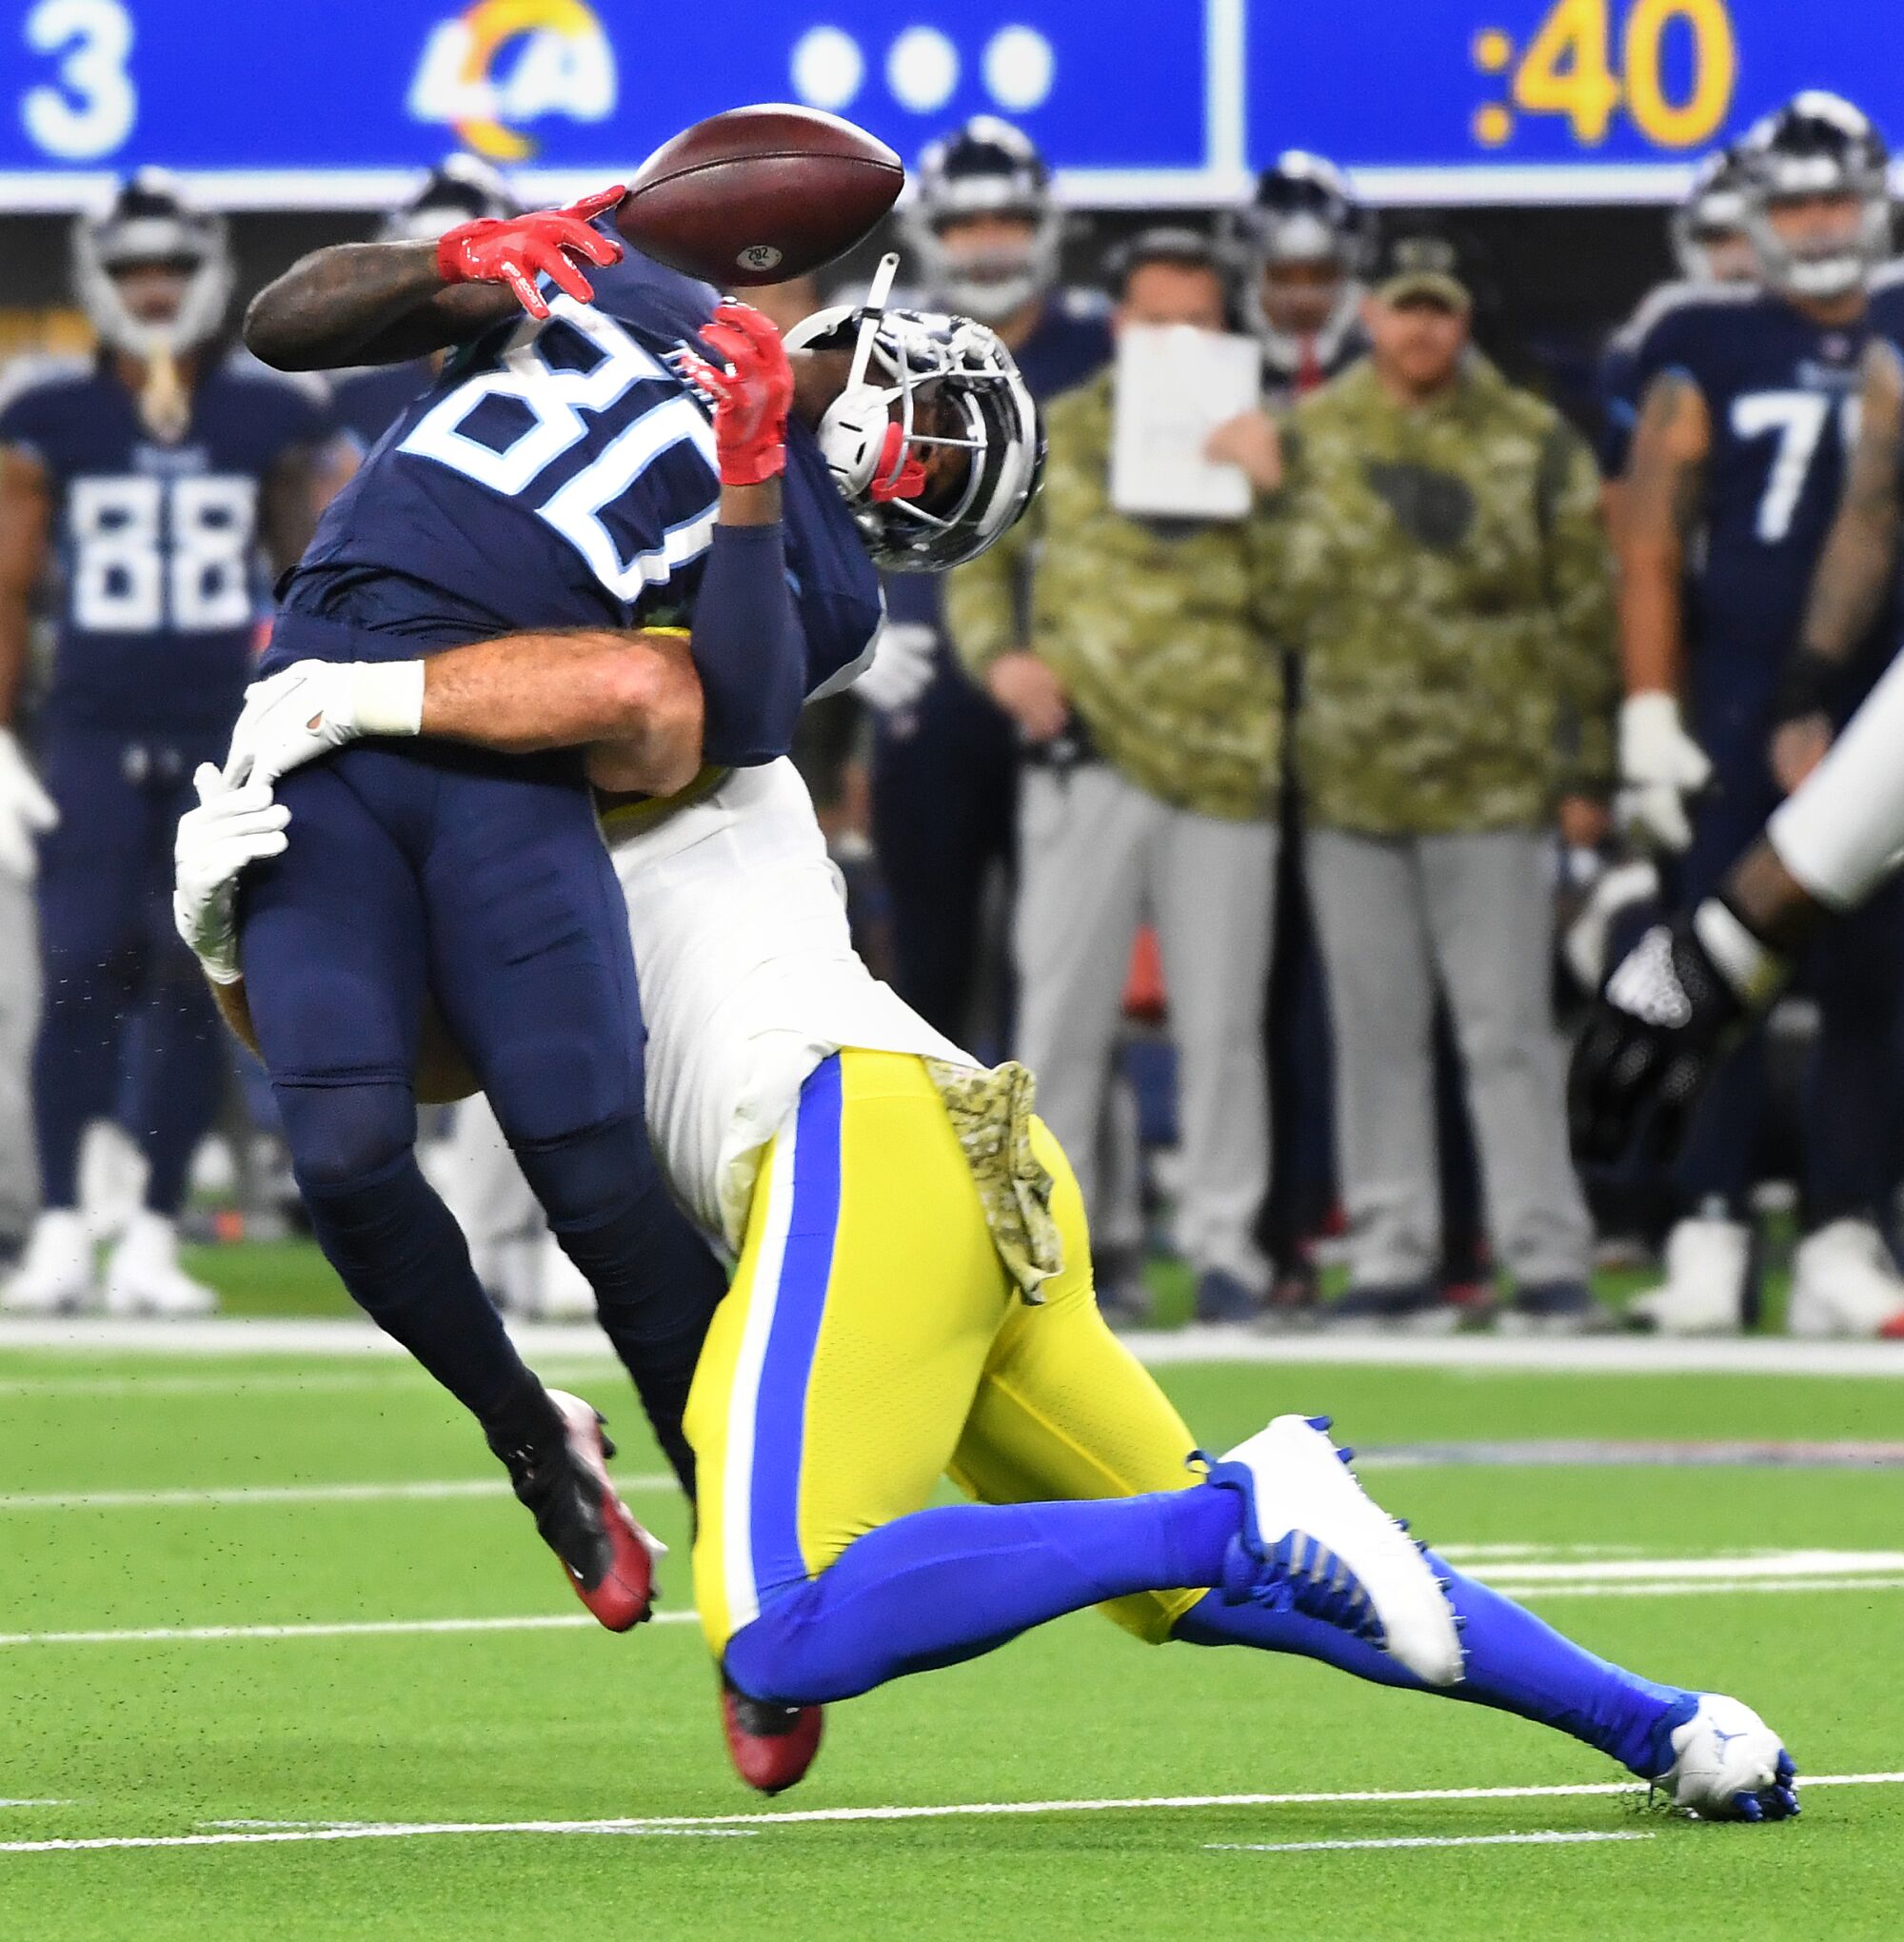 Titans receiver Chester Rogers can't make a catch as he takes big hit from Rams linebacker Ernest Jones.